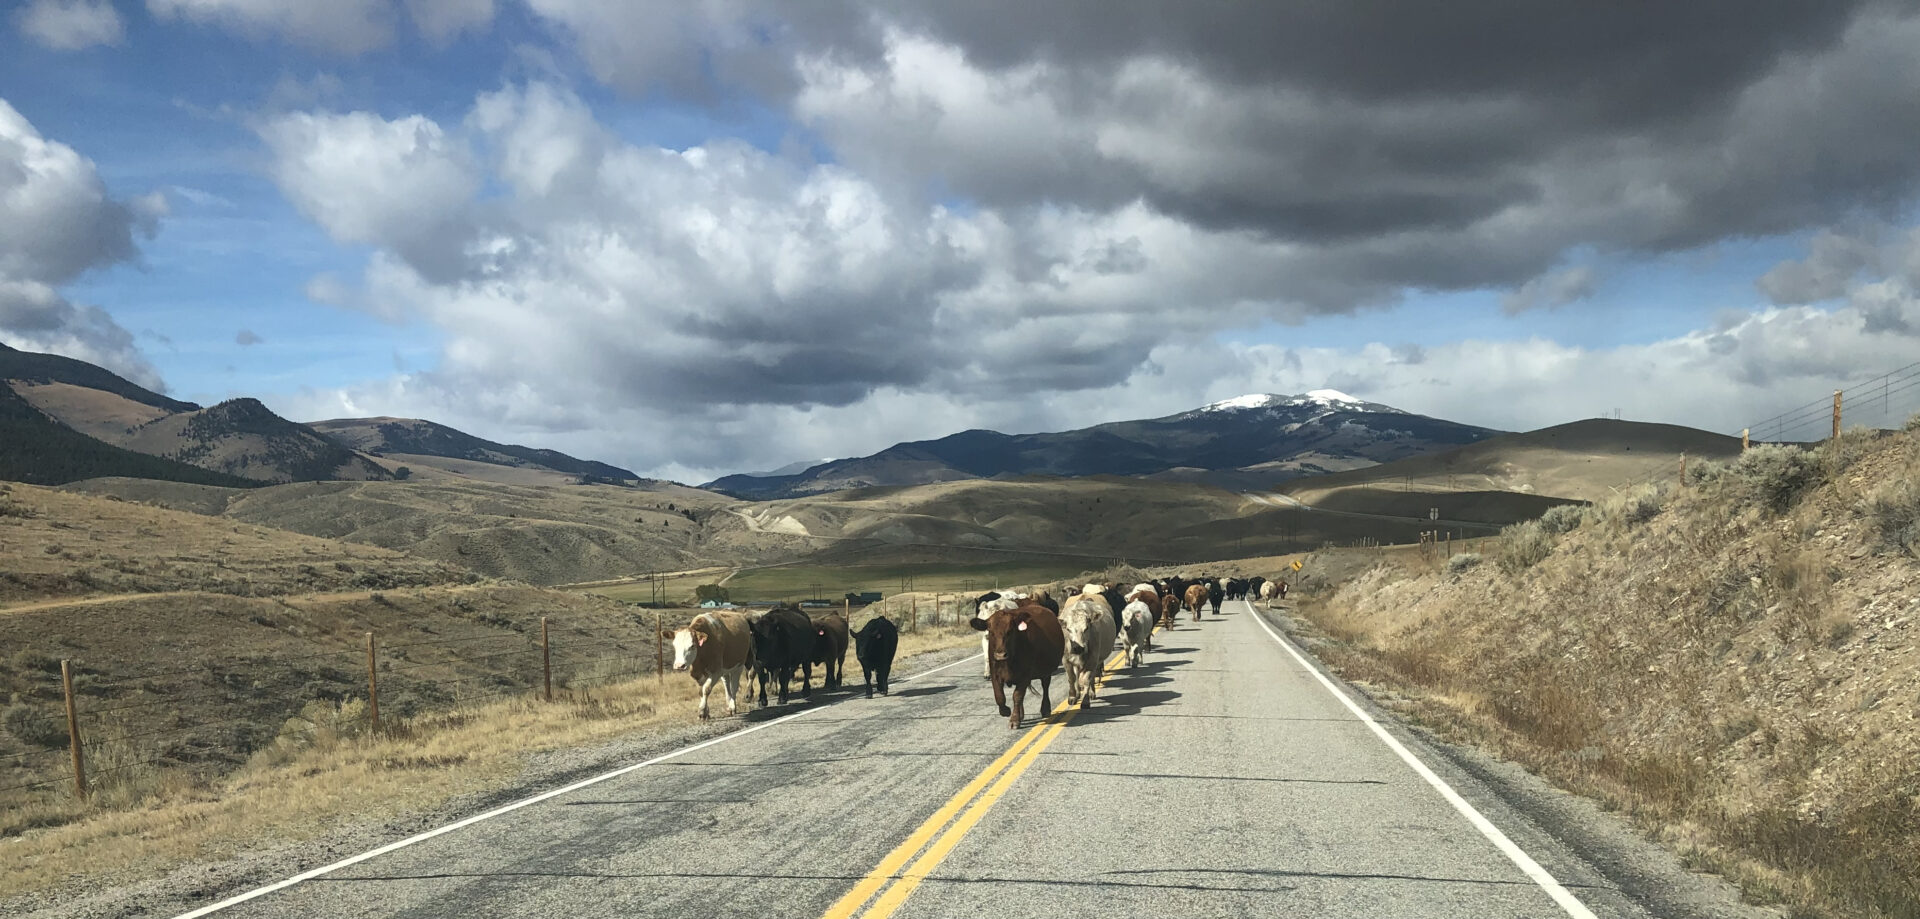 Cows walking on a road